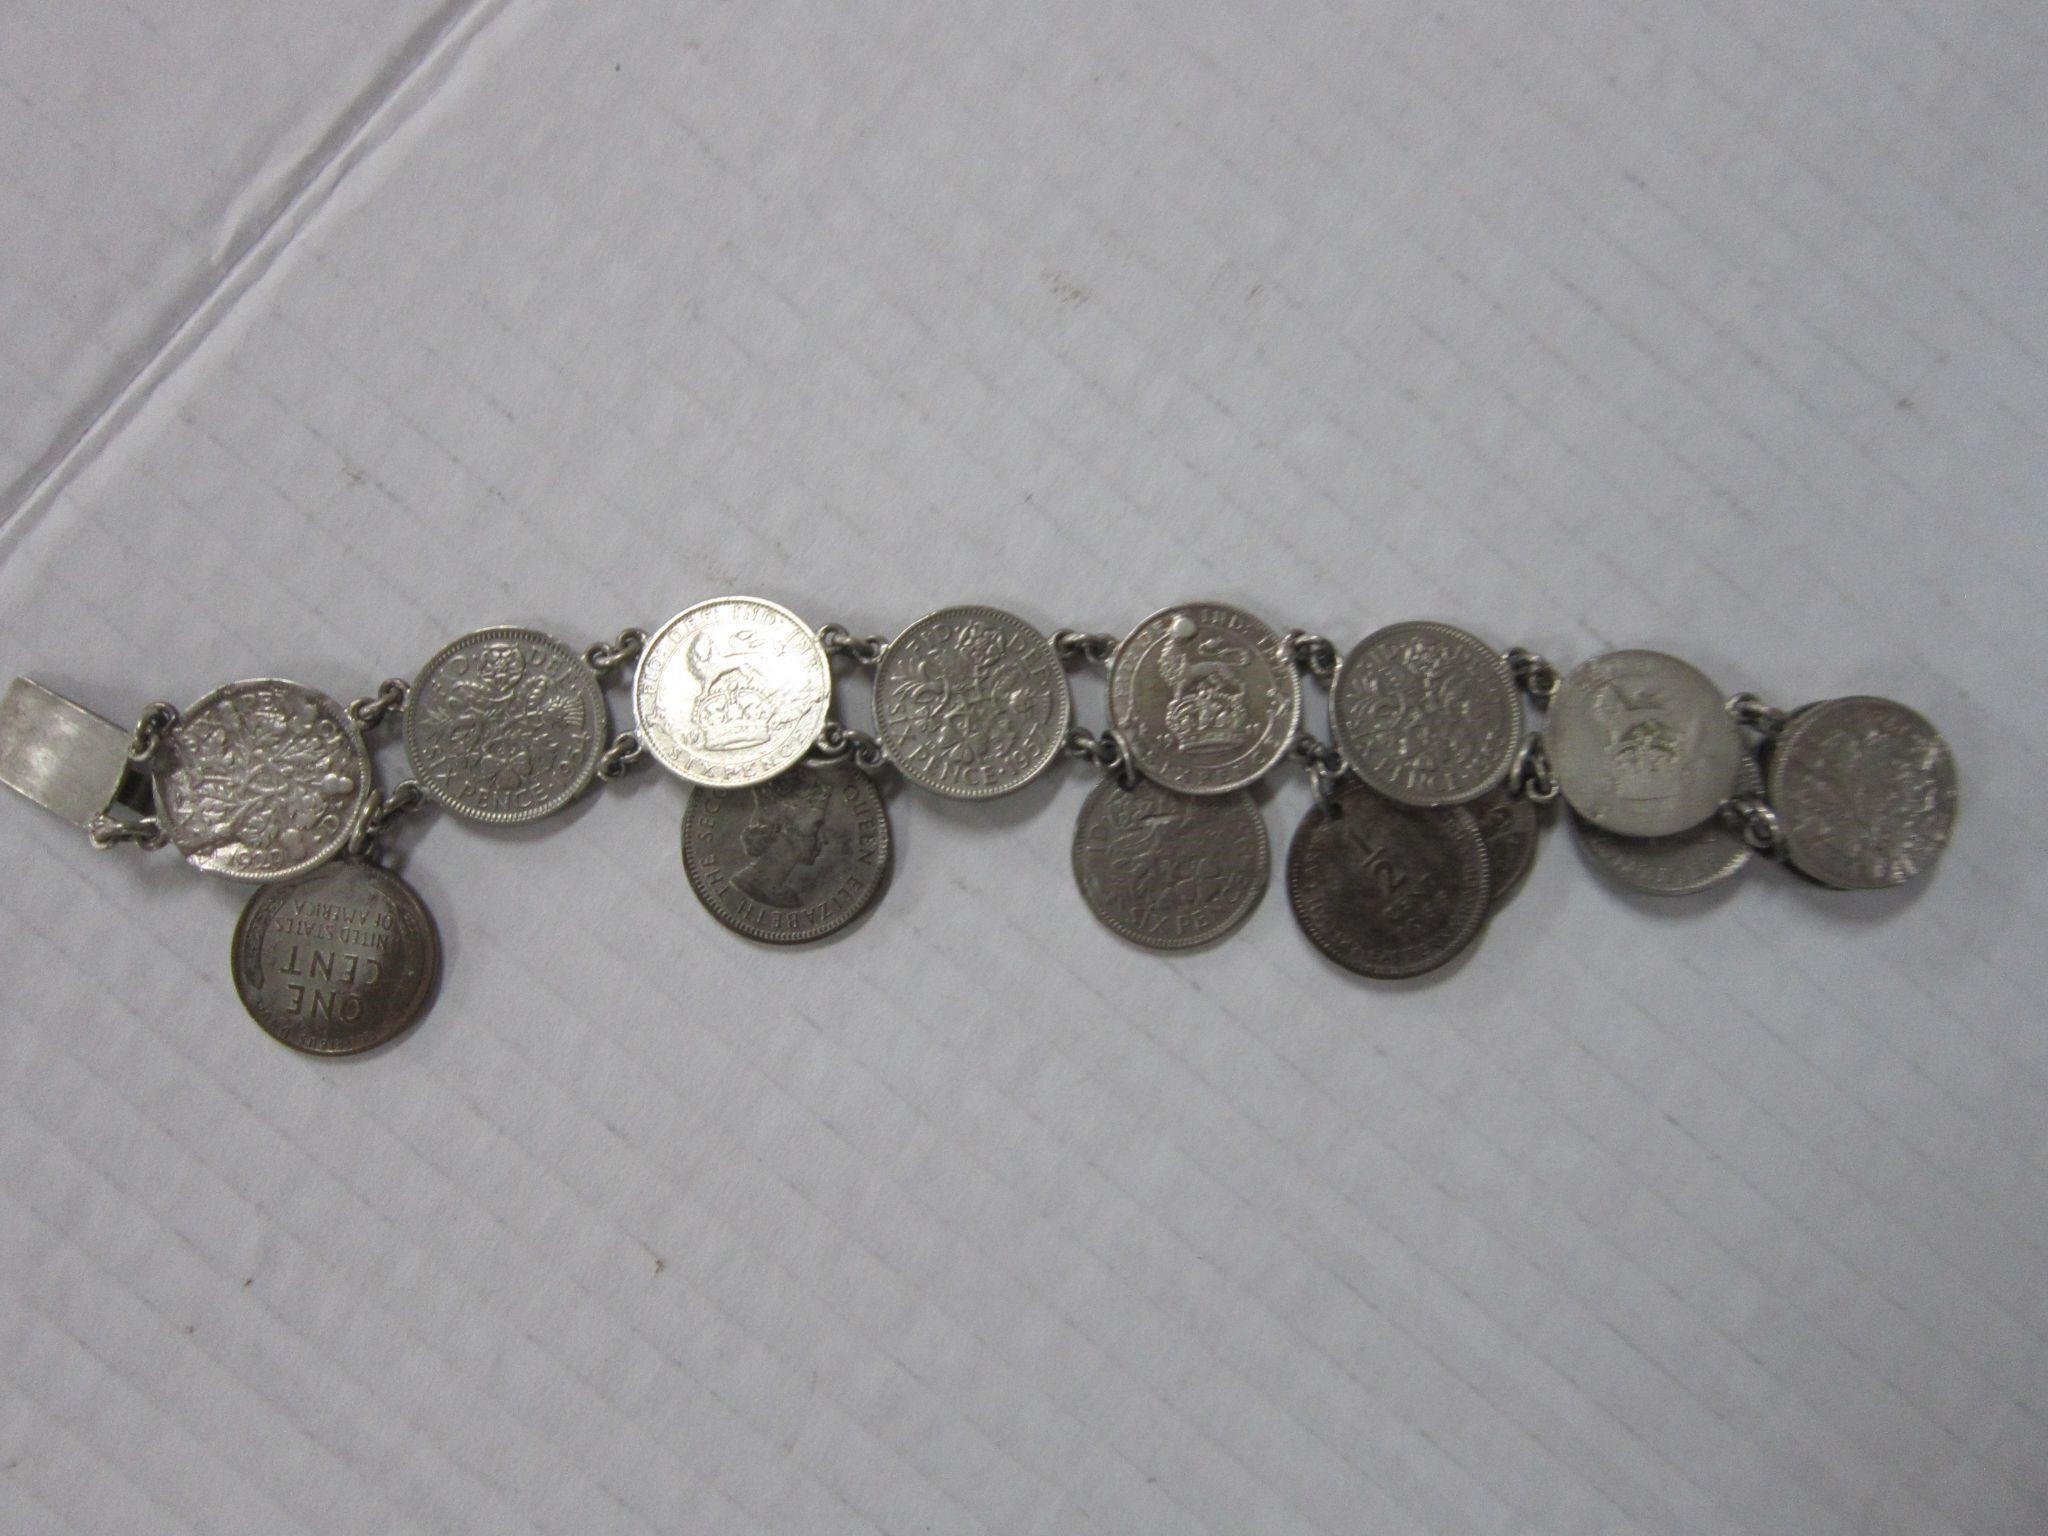 BRACELET WITH FOREIGN AND US COINS